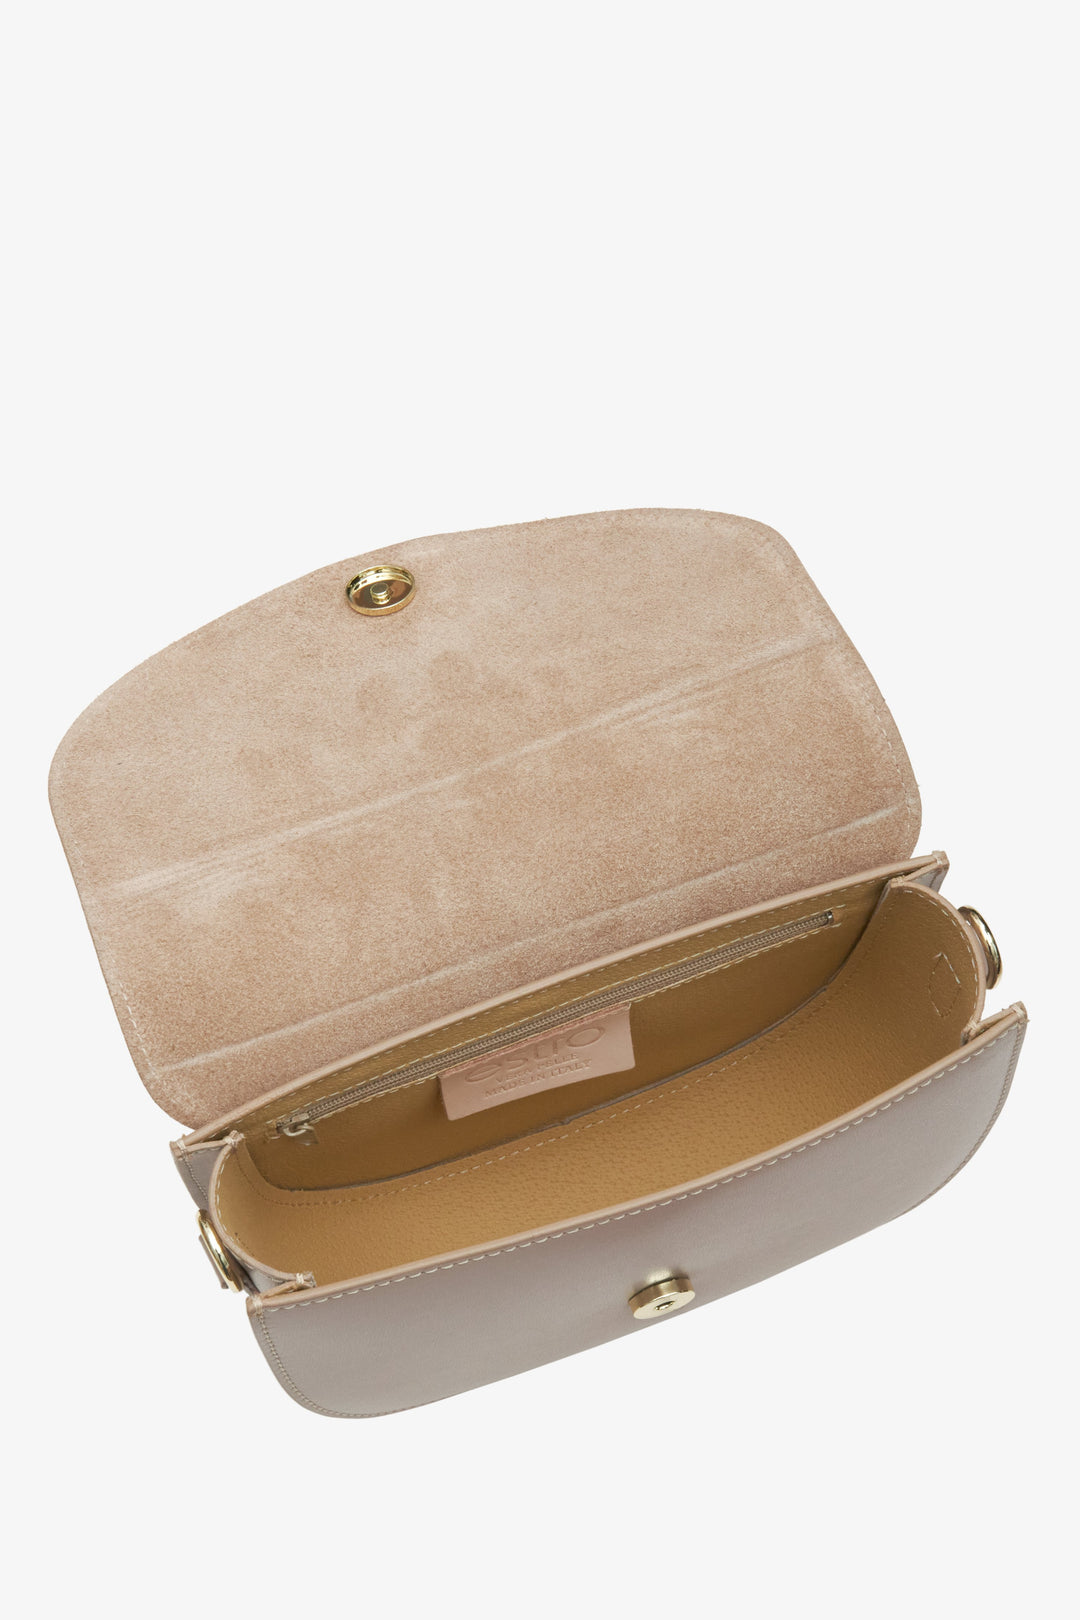 Women's beige Estro handbag made of genuine leather - close-up on the interior of the model.